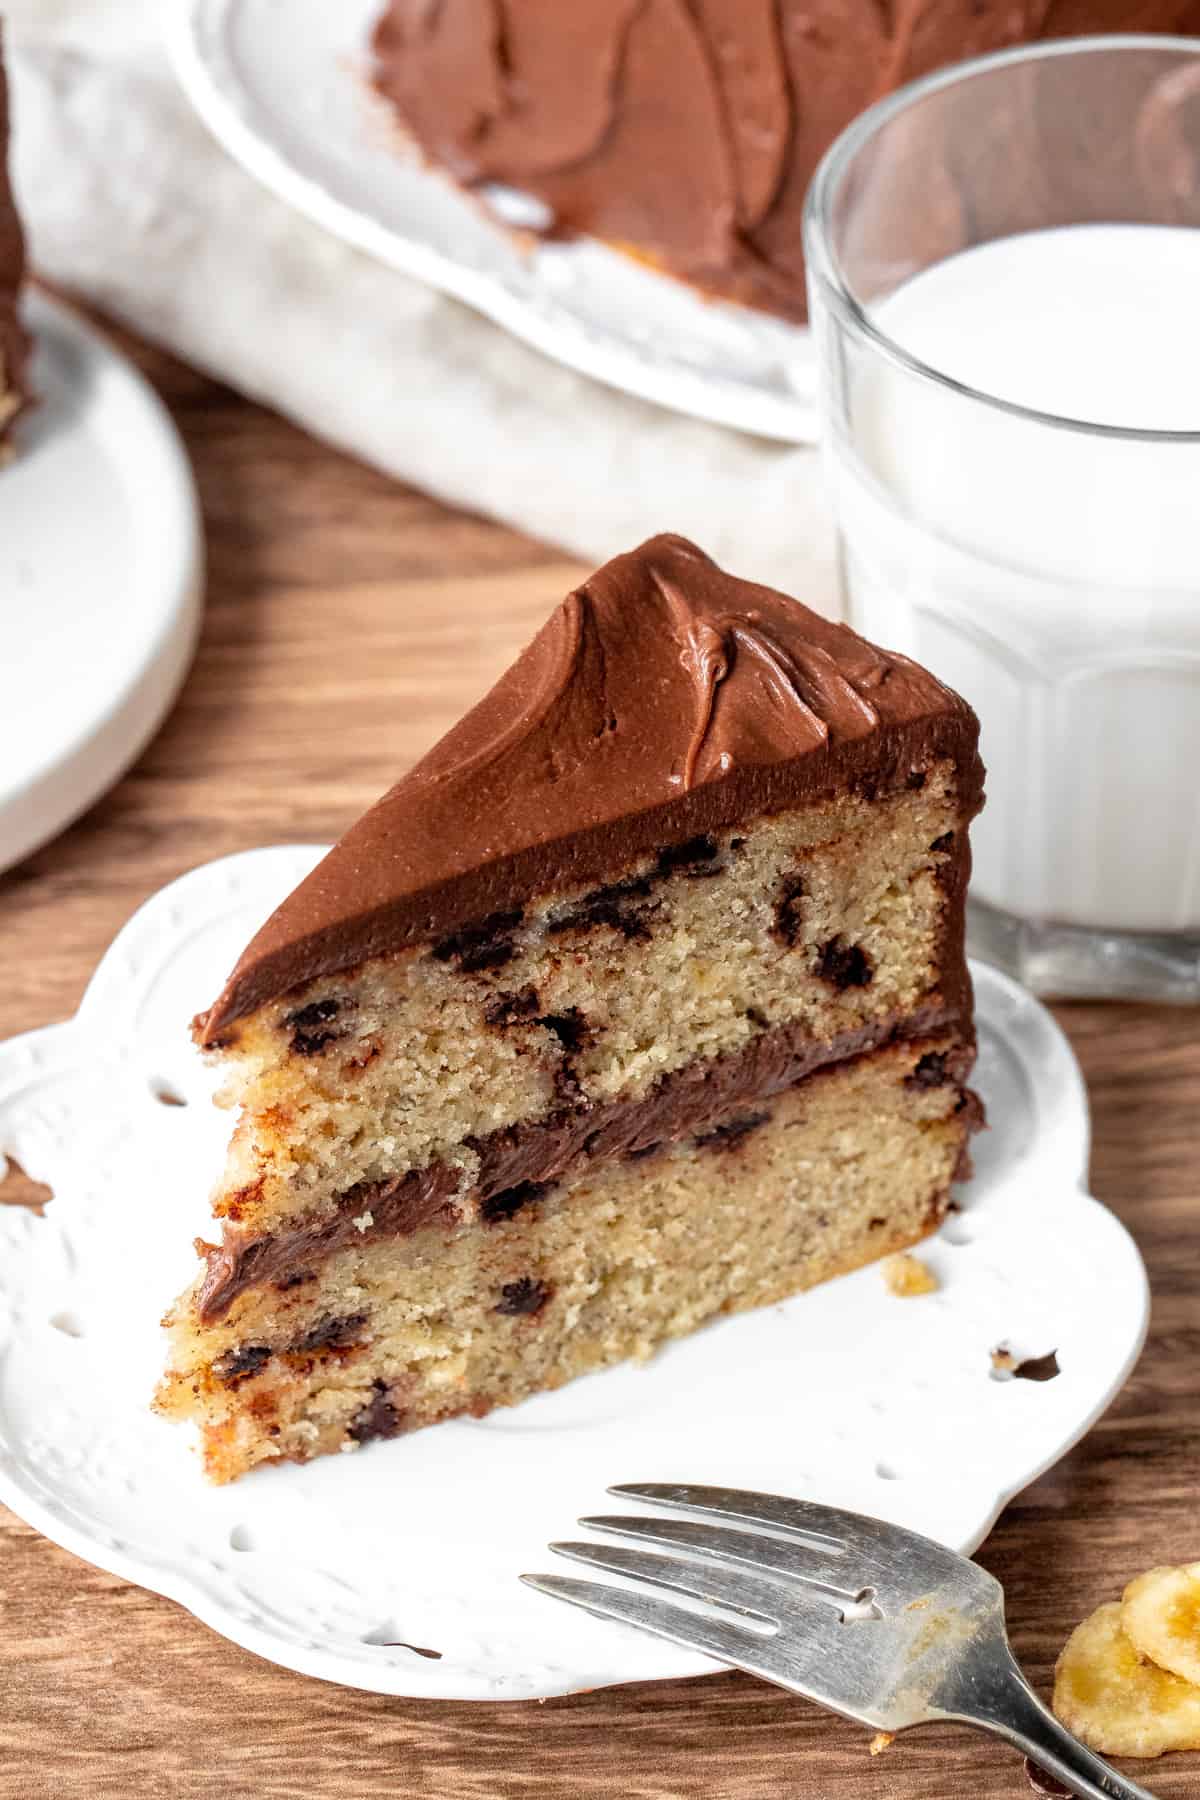 Slice of banana chocolate chip cake with chocolate frosting